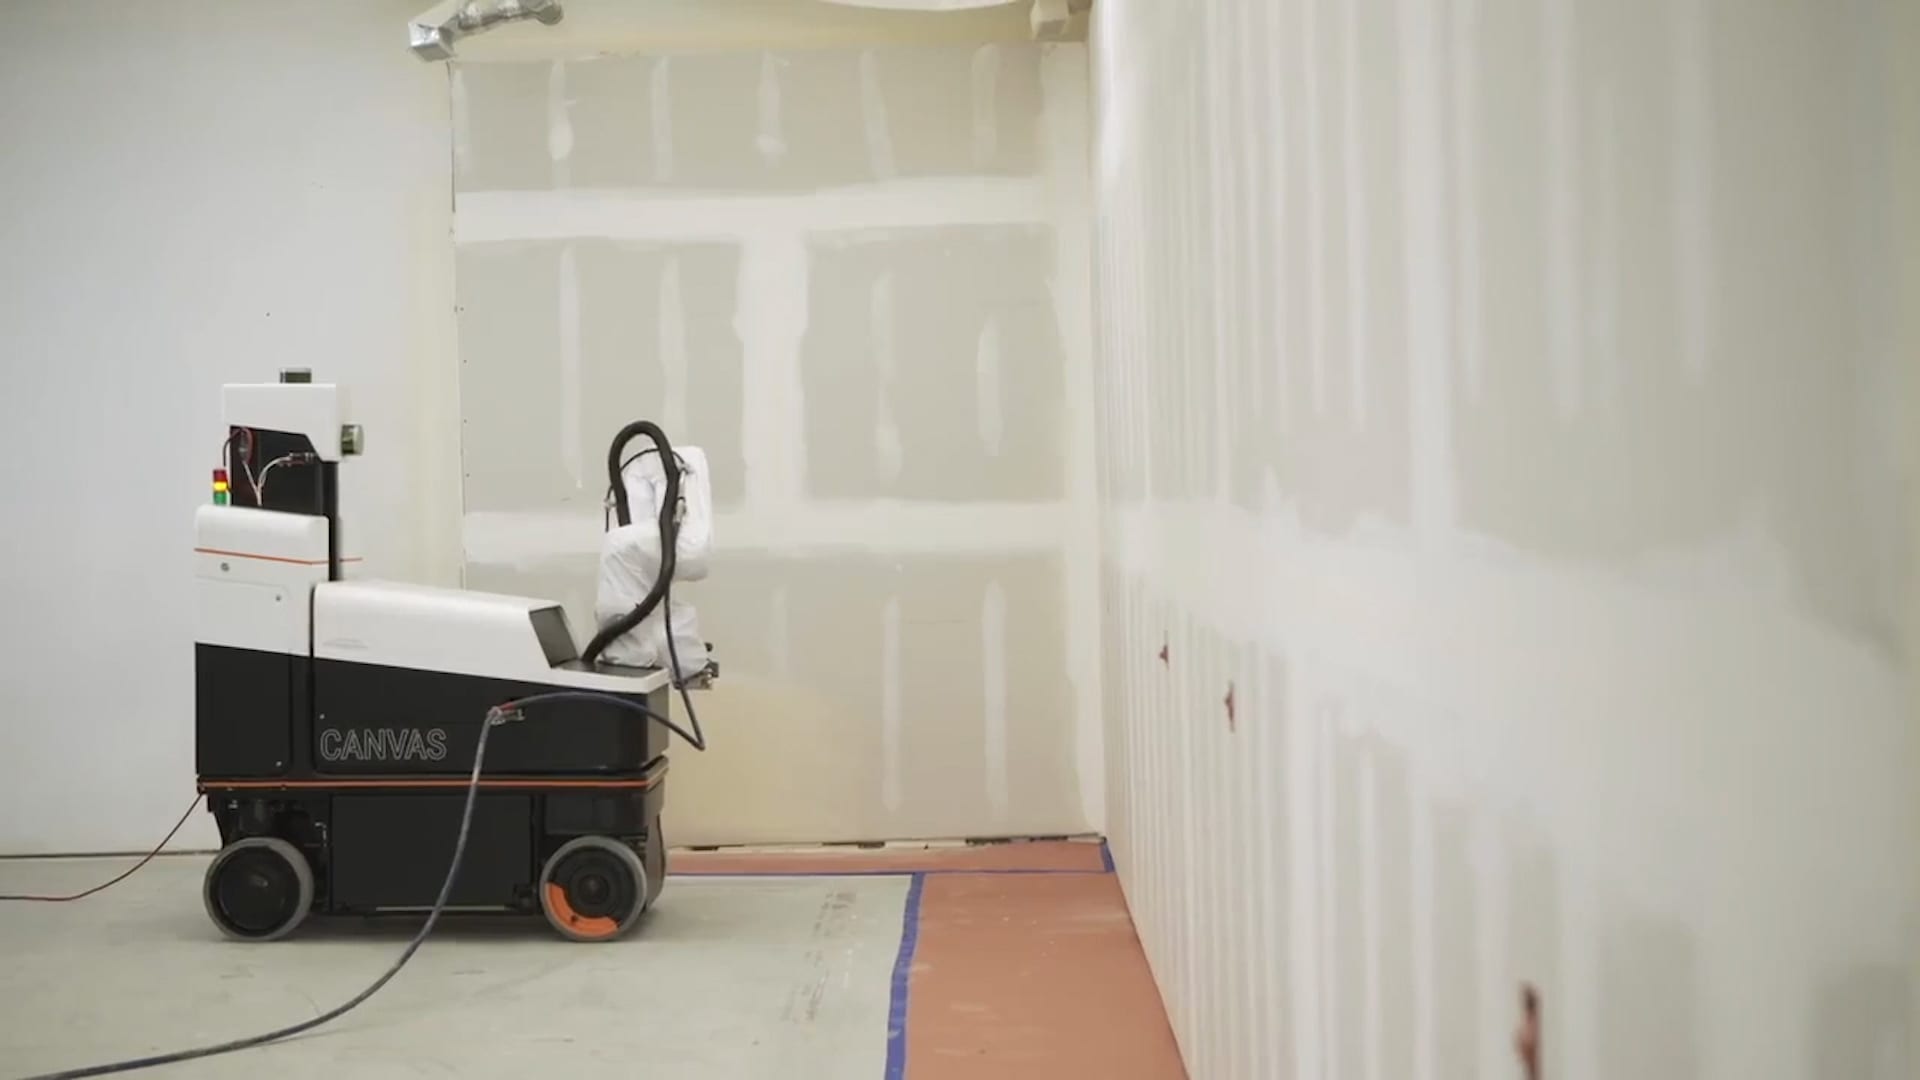 The Canvas robotic drywall system.